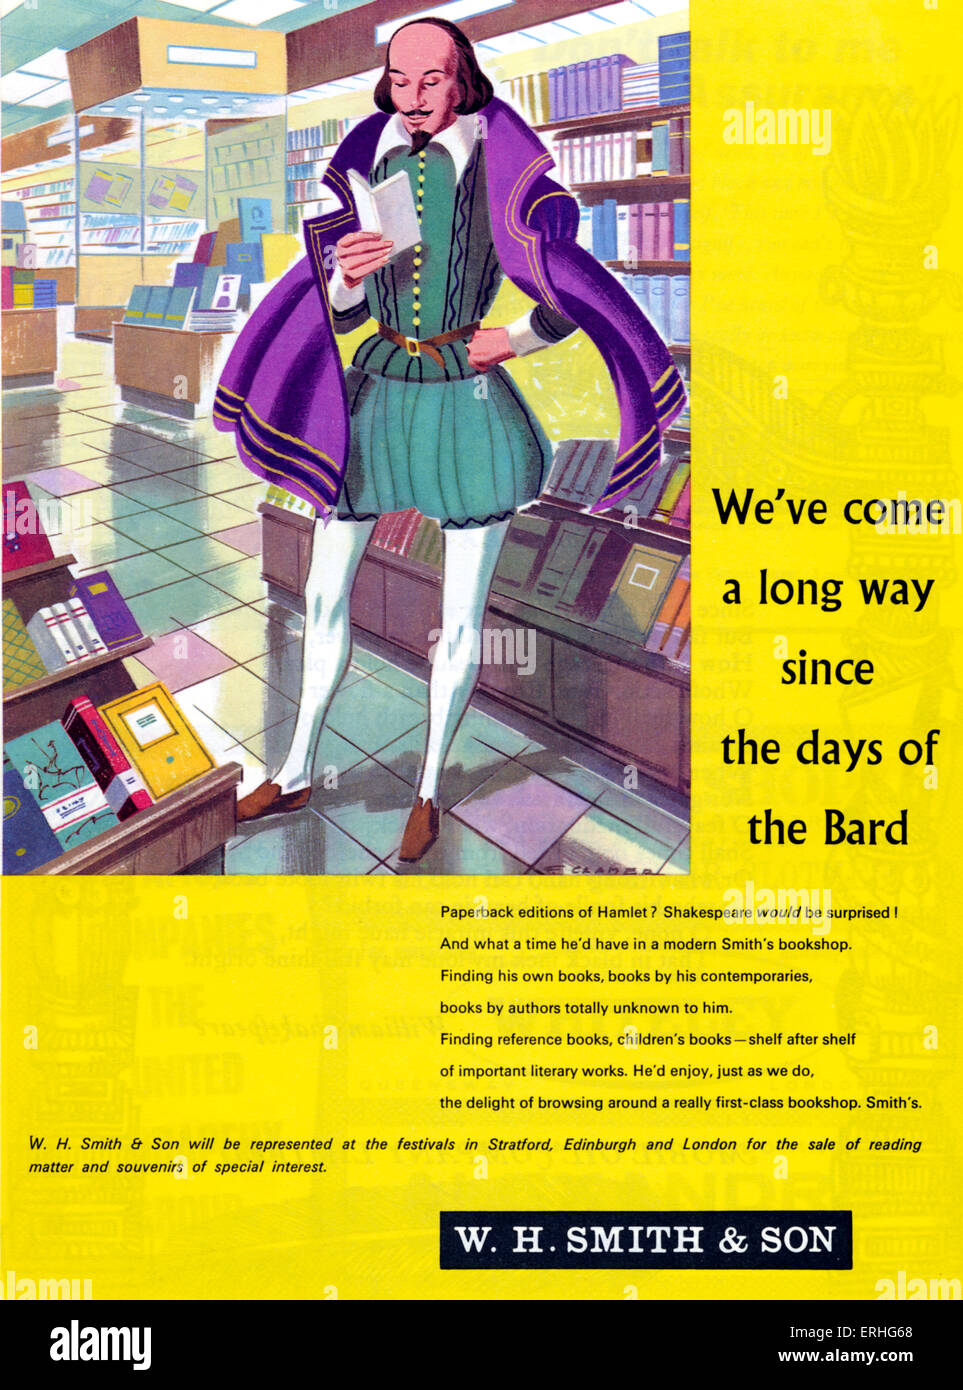 William Shakespeare - advertisement by W H Smith with Shakespeare reading a book in a modern book shop. WS: English poet and Stock Photo